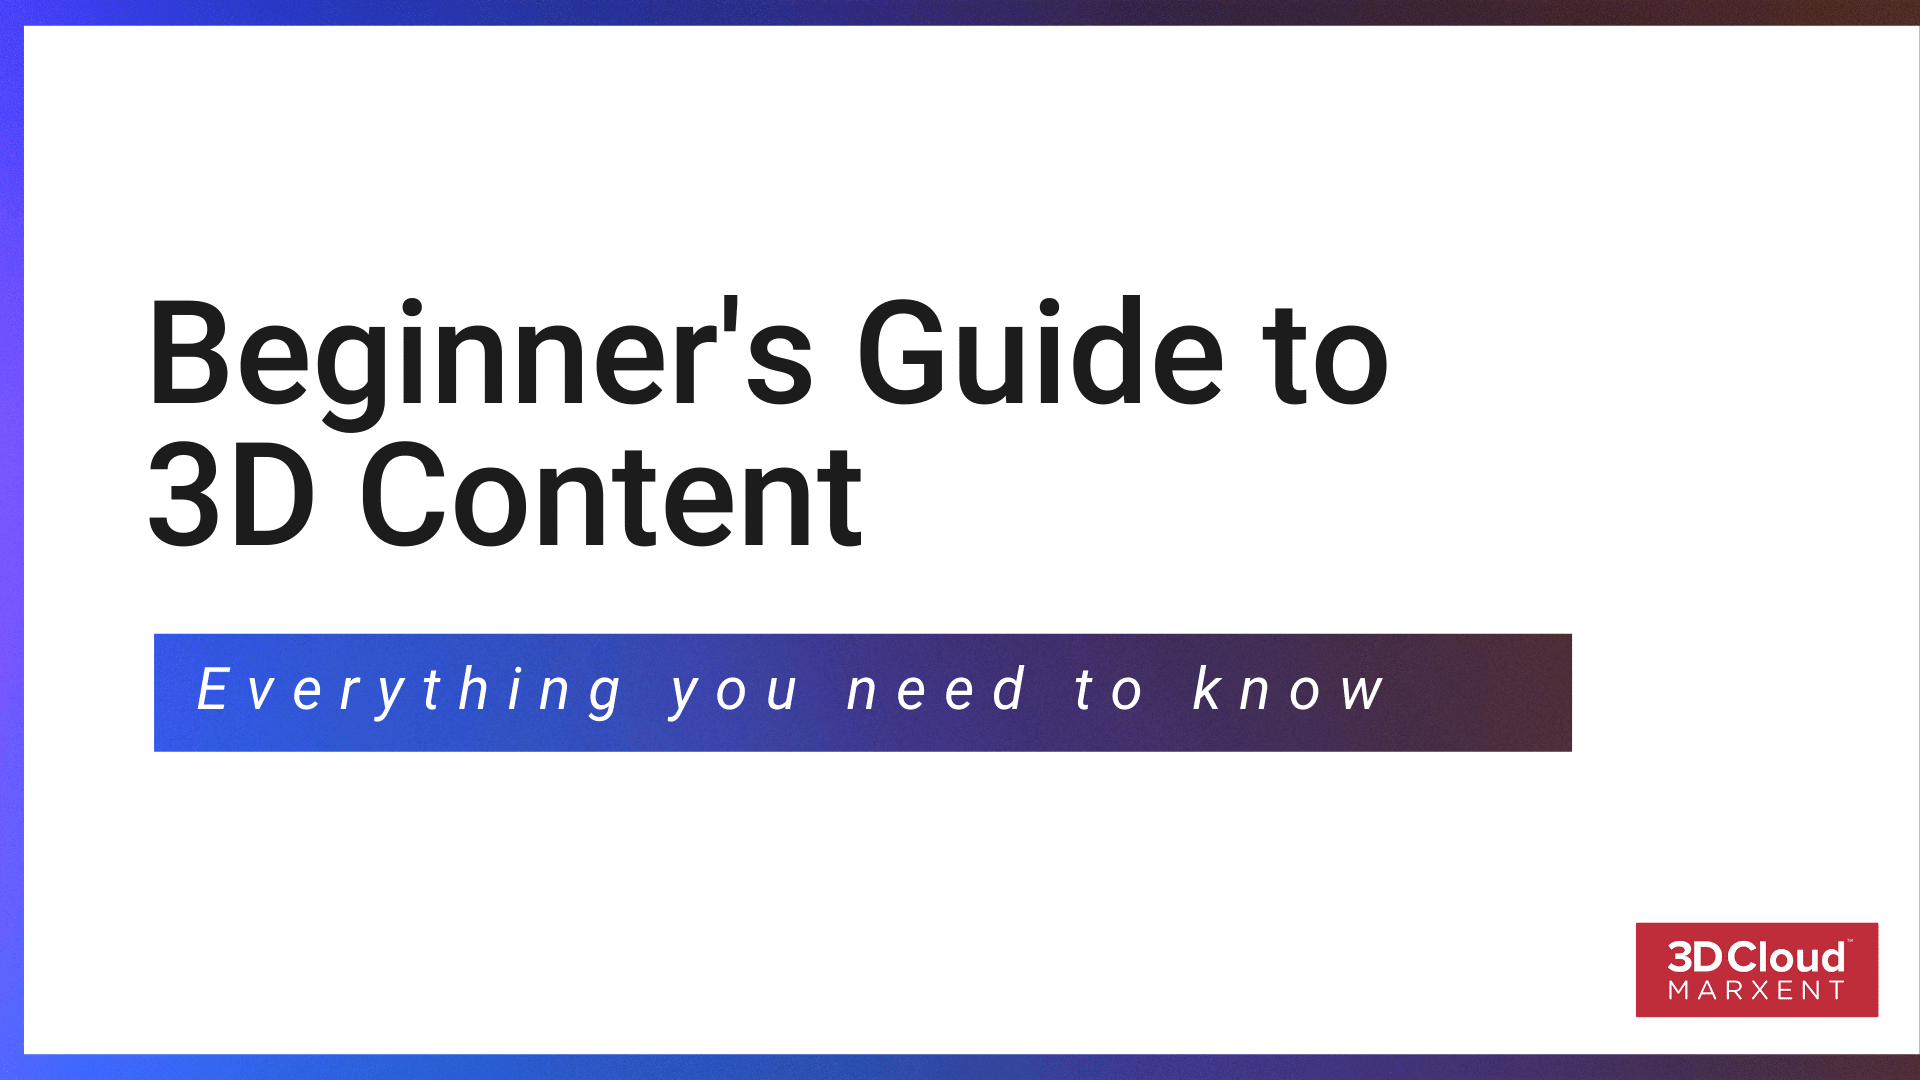 Beginner’s Guide to 3D Content and Applications